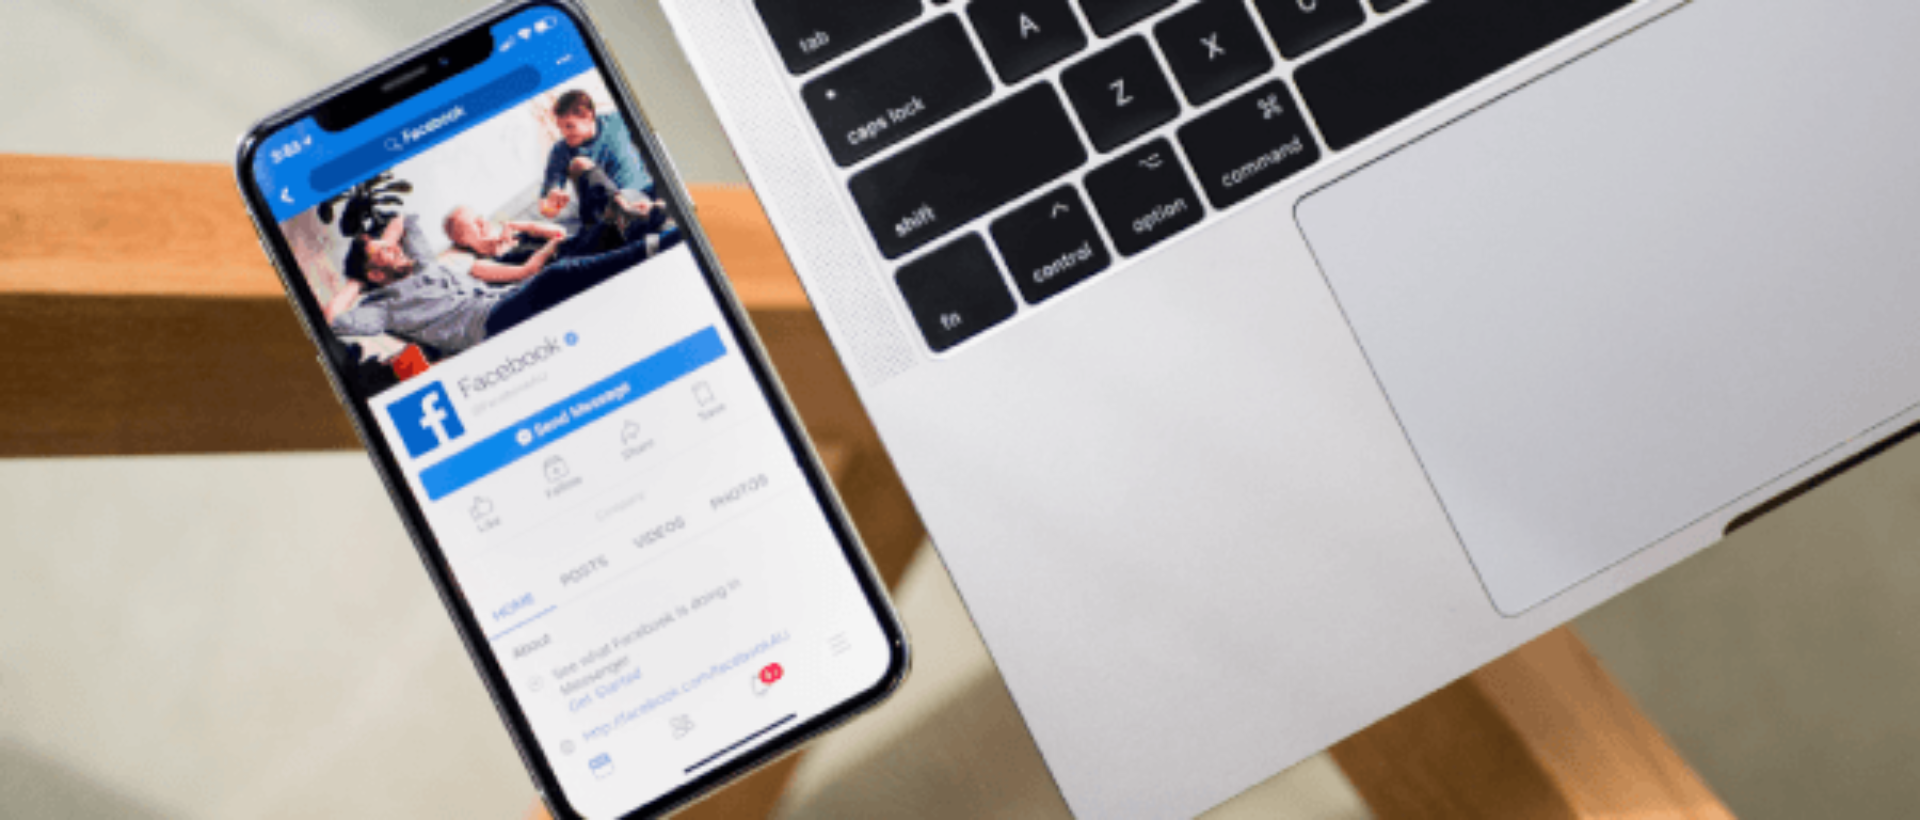 download video from facebook ads library